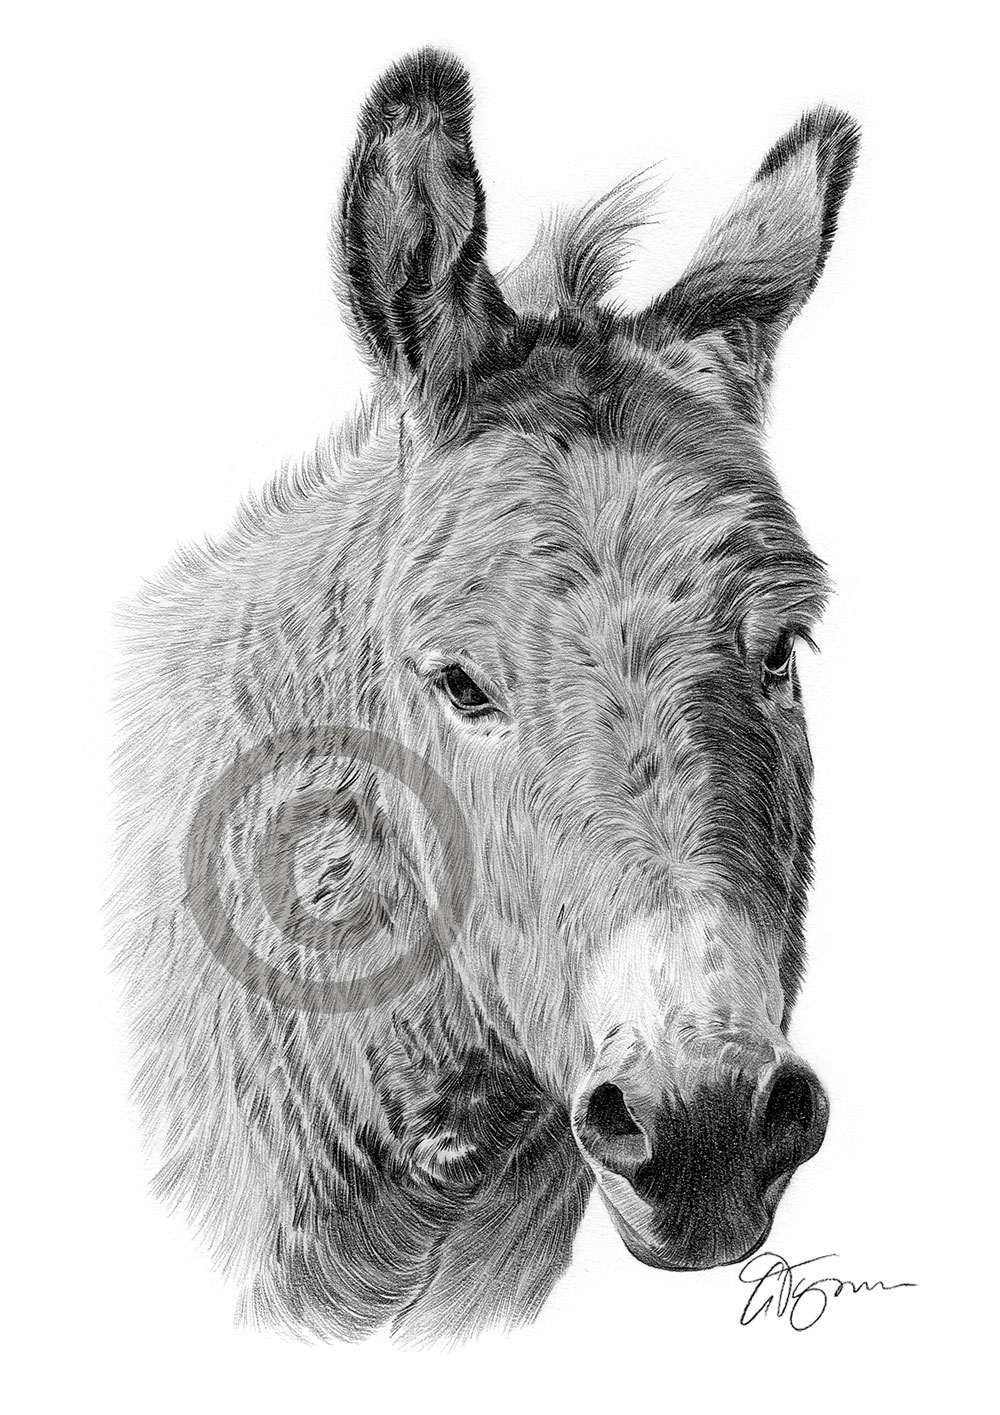 Pencil drawing of a donkey by artist Gary Tymon